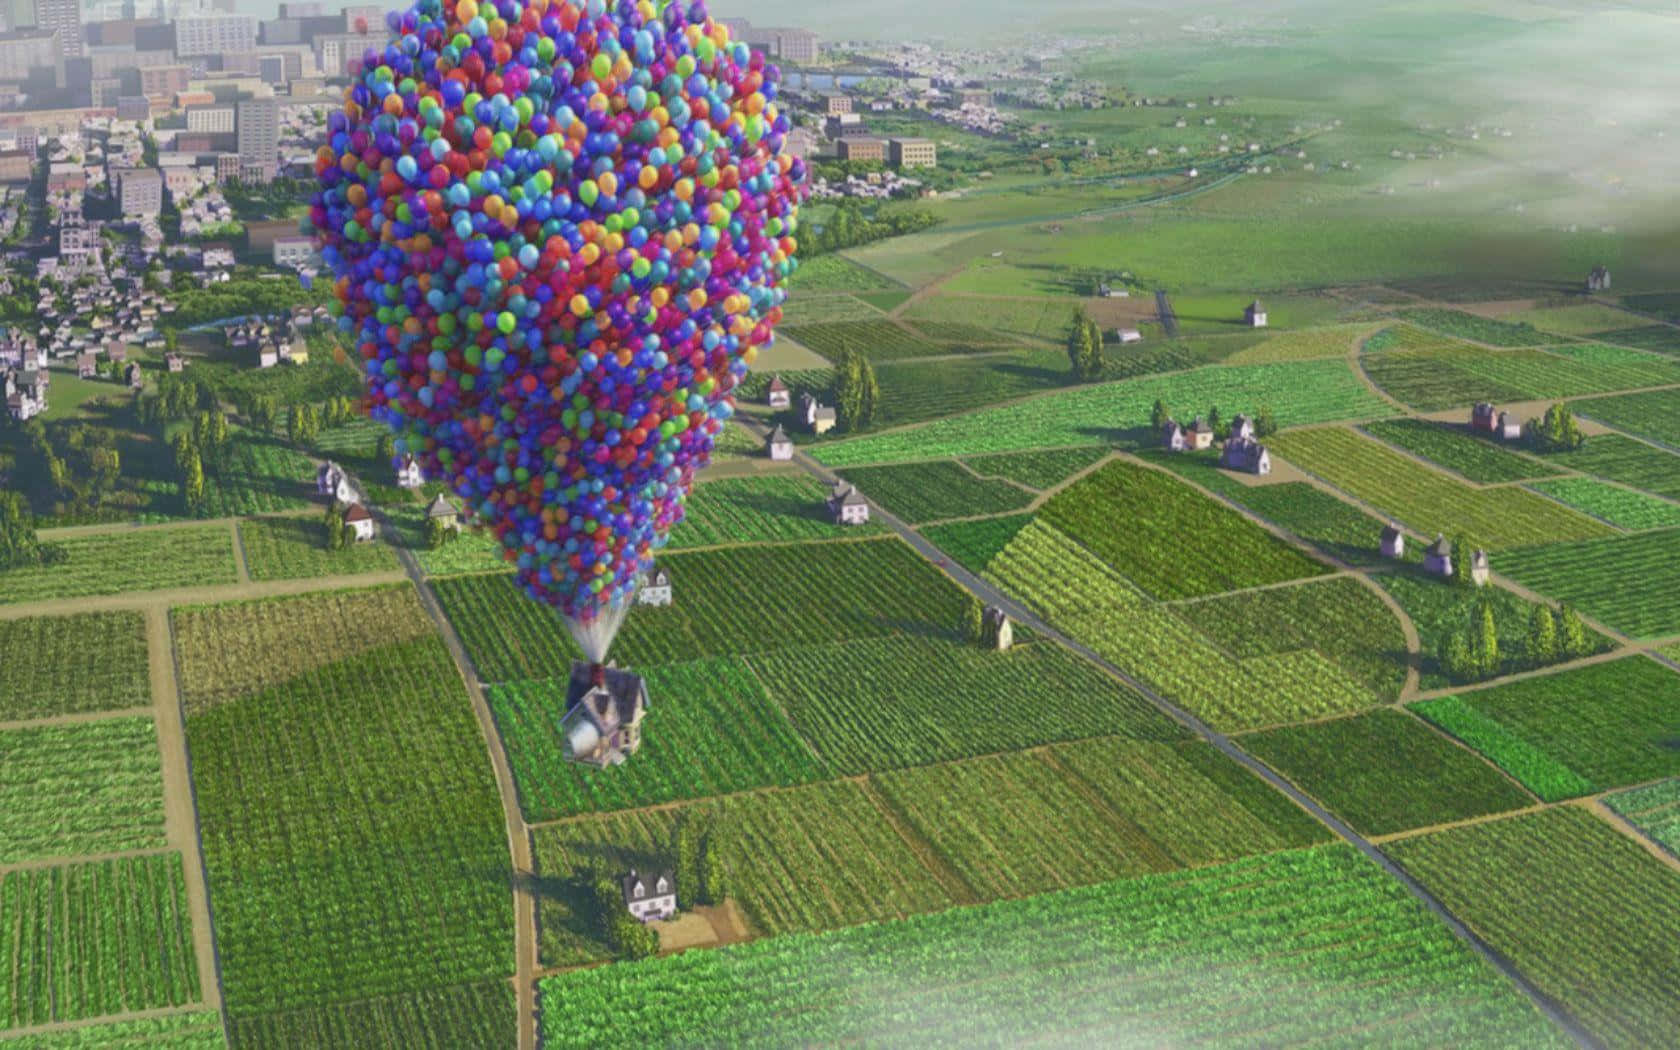 A Colorful Sky with Flying House Tied to Balloons